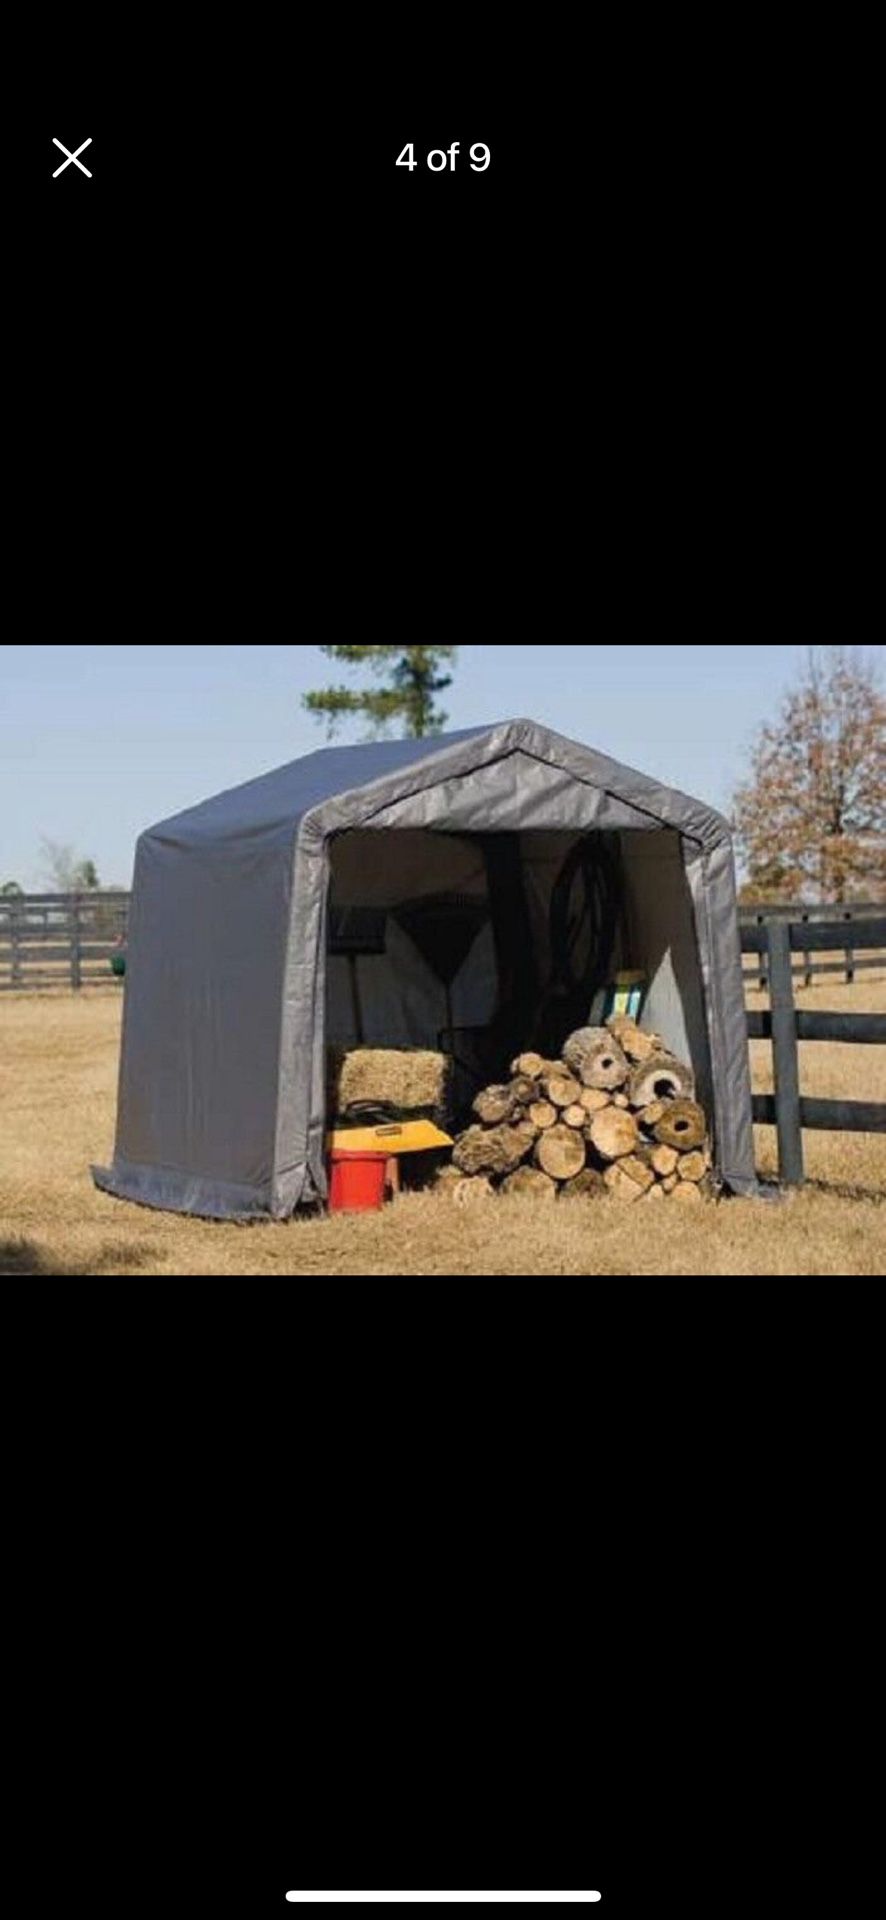 NEW! Shelter Logic Shed 10x10x8 Portable Garage Shed Canopy Car ATV Motorcycle Tractor